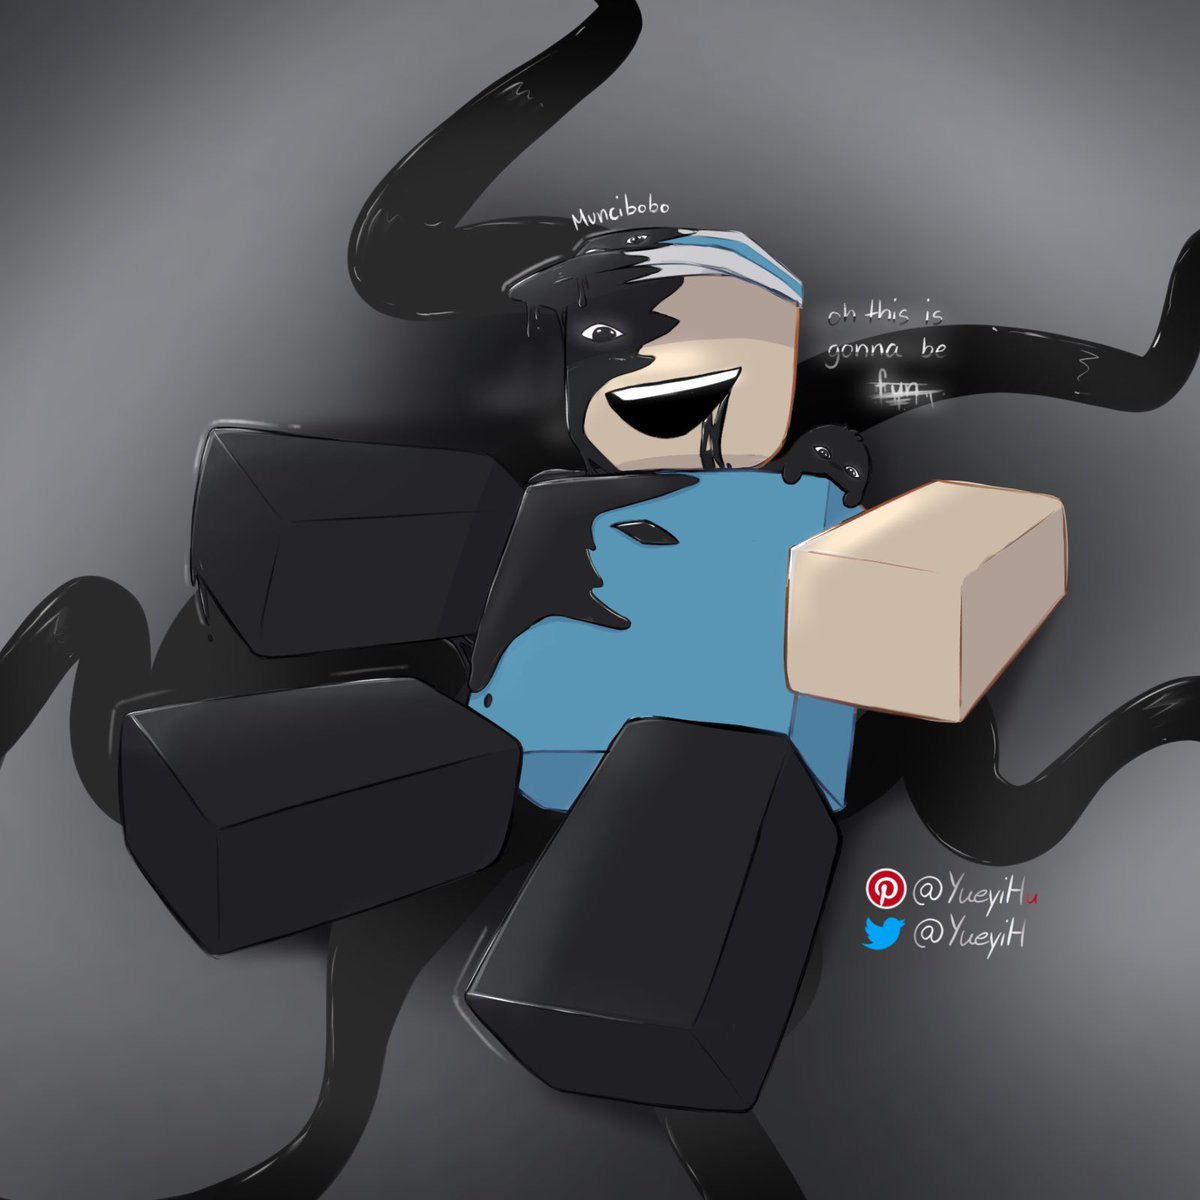 Yueyi (comms open) on X: I tried drawing on phone again, I had fun 😆👆📱  Anyways, what is inside that box? It seems suspicious… #evade #roblox  #robloxart #evaderoblox #robloxevade #evadefanart #evadeart   /